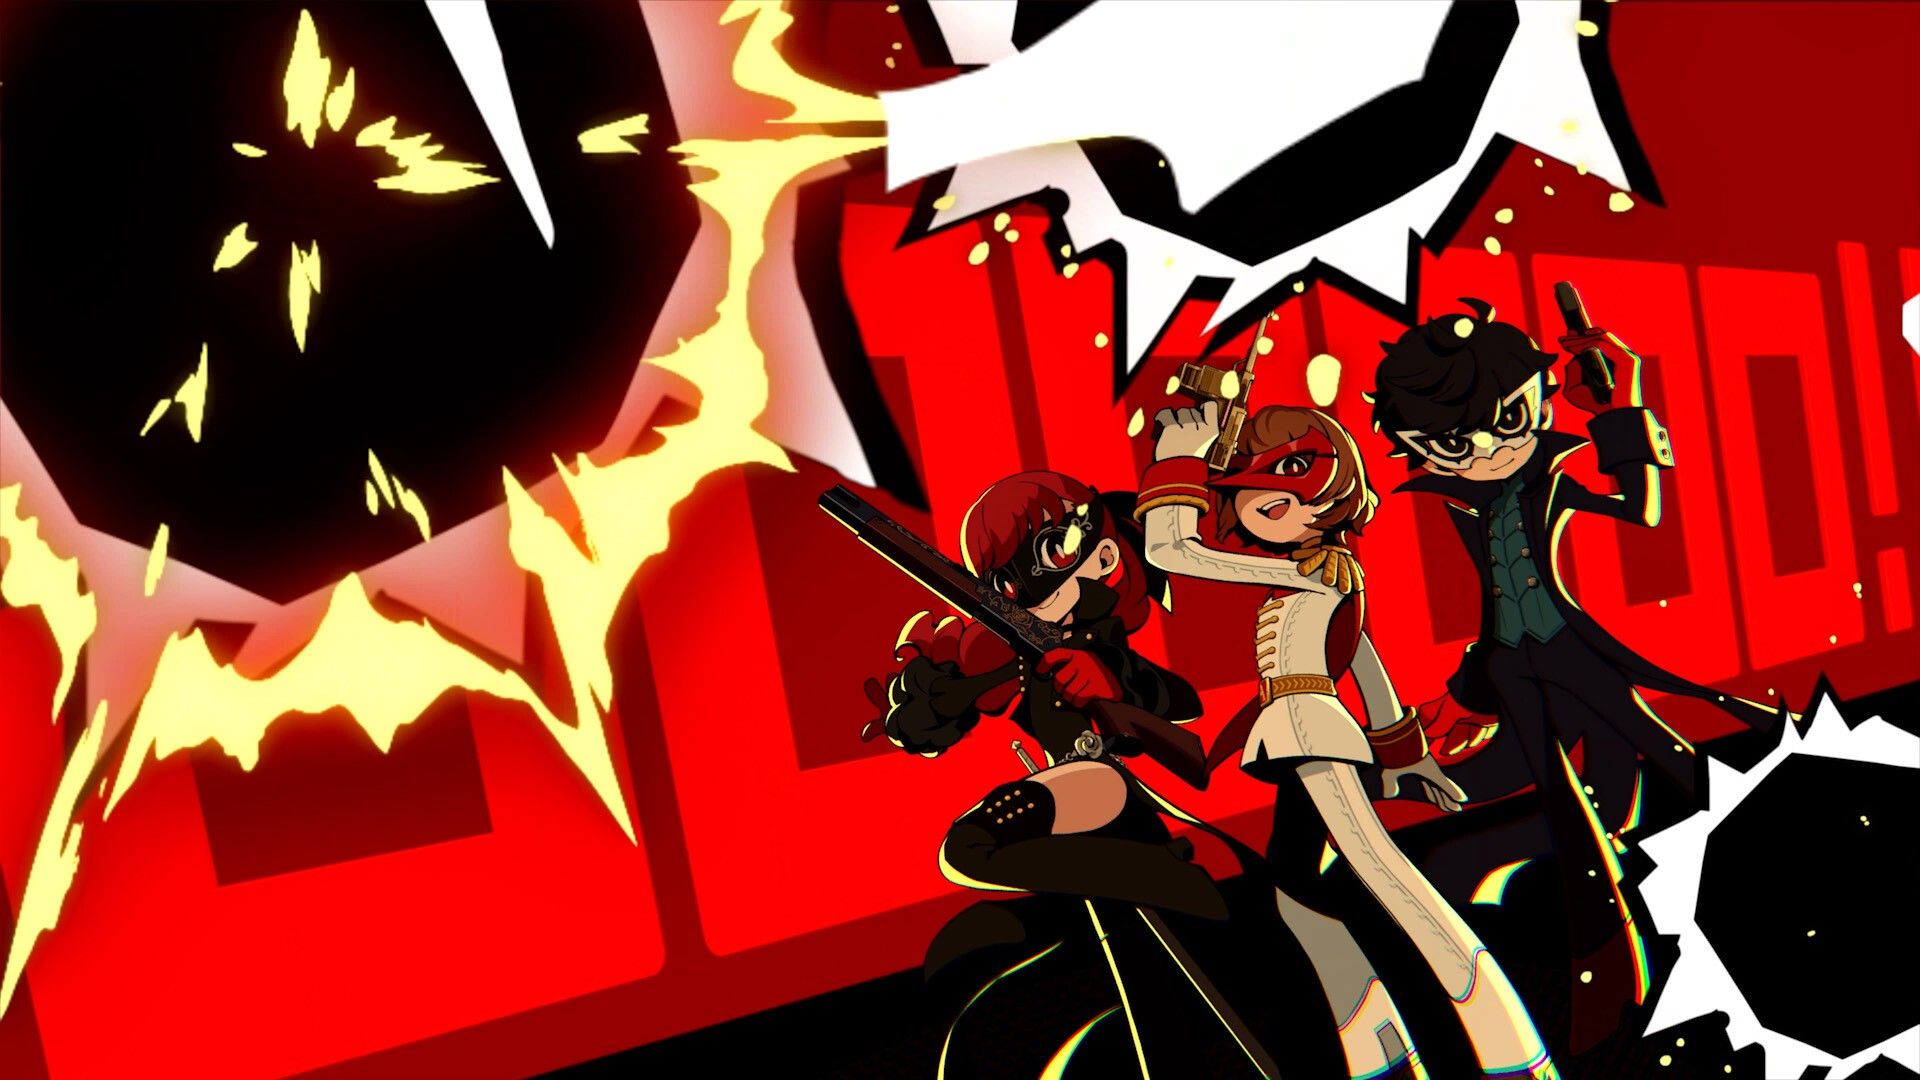 Persona 5 guide: Walkthrough and tips for making the most of your